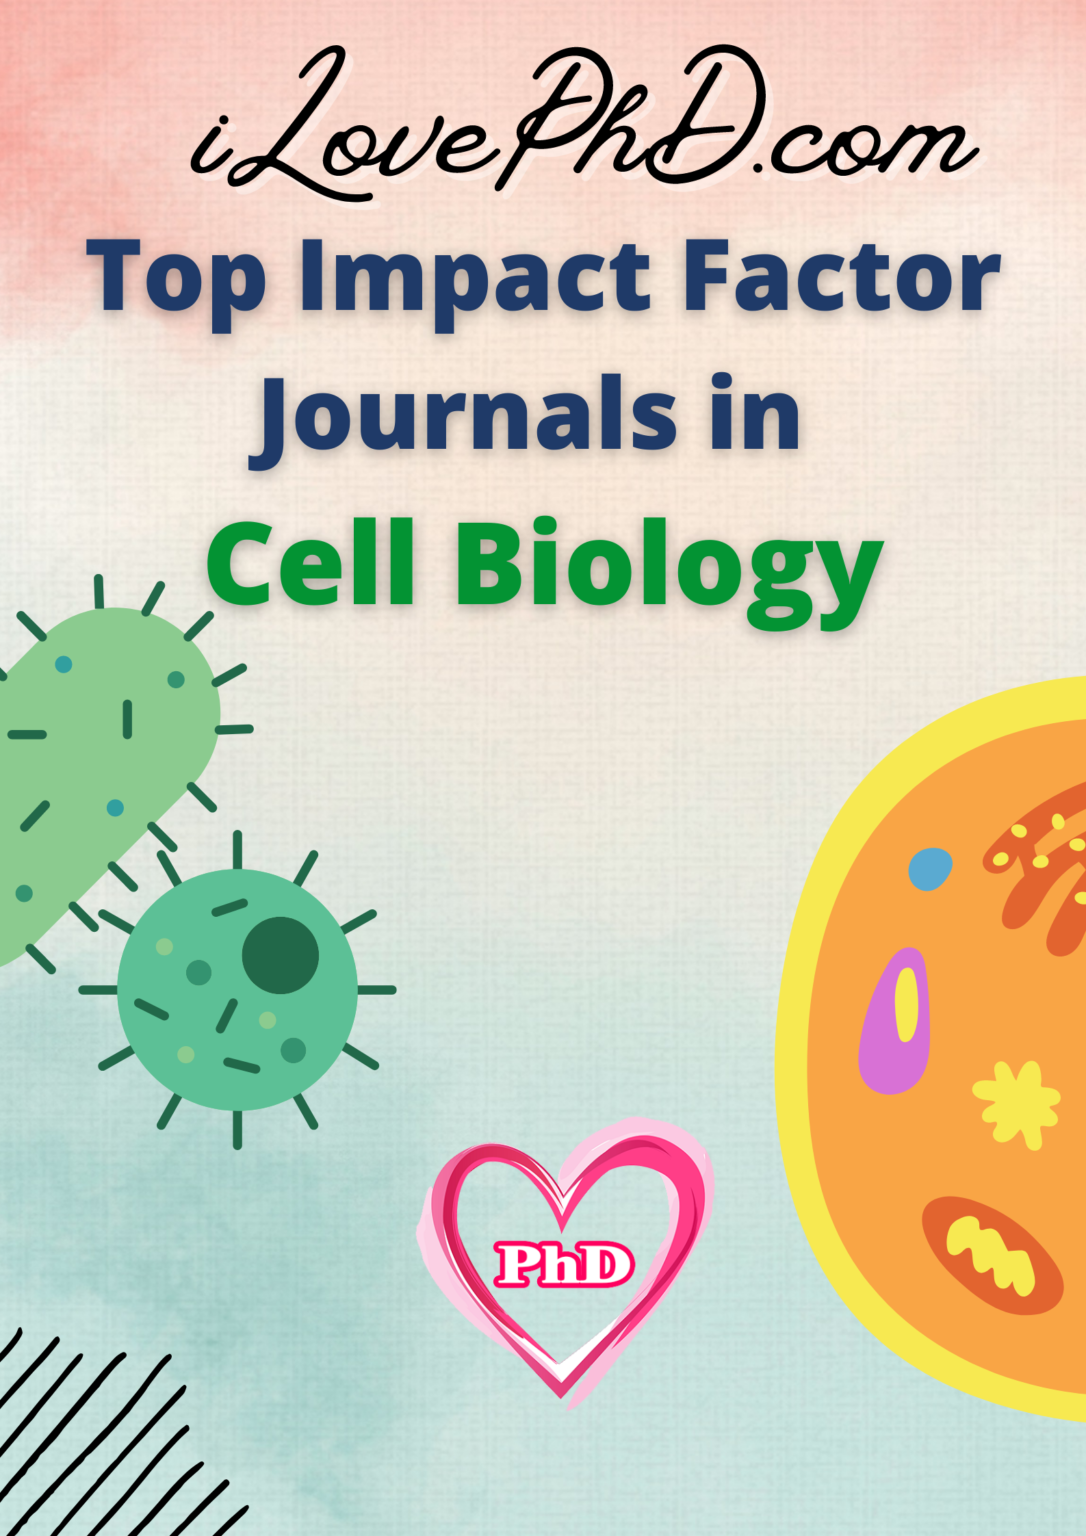 Top Impact Factor Journals in Cell Biology iLovePhD